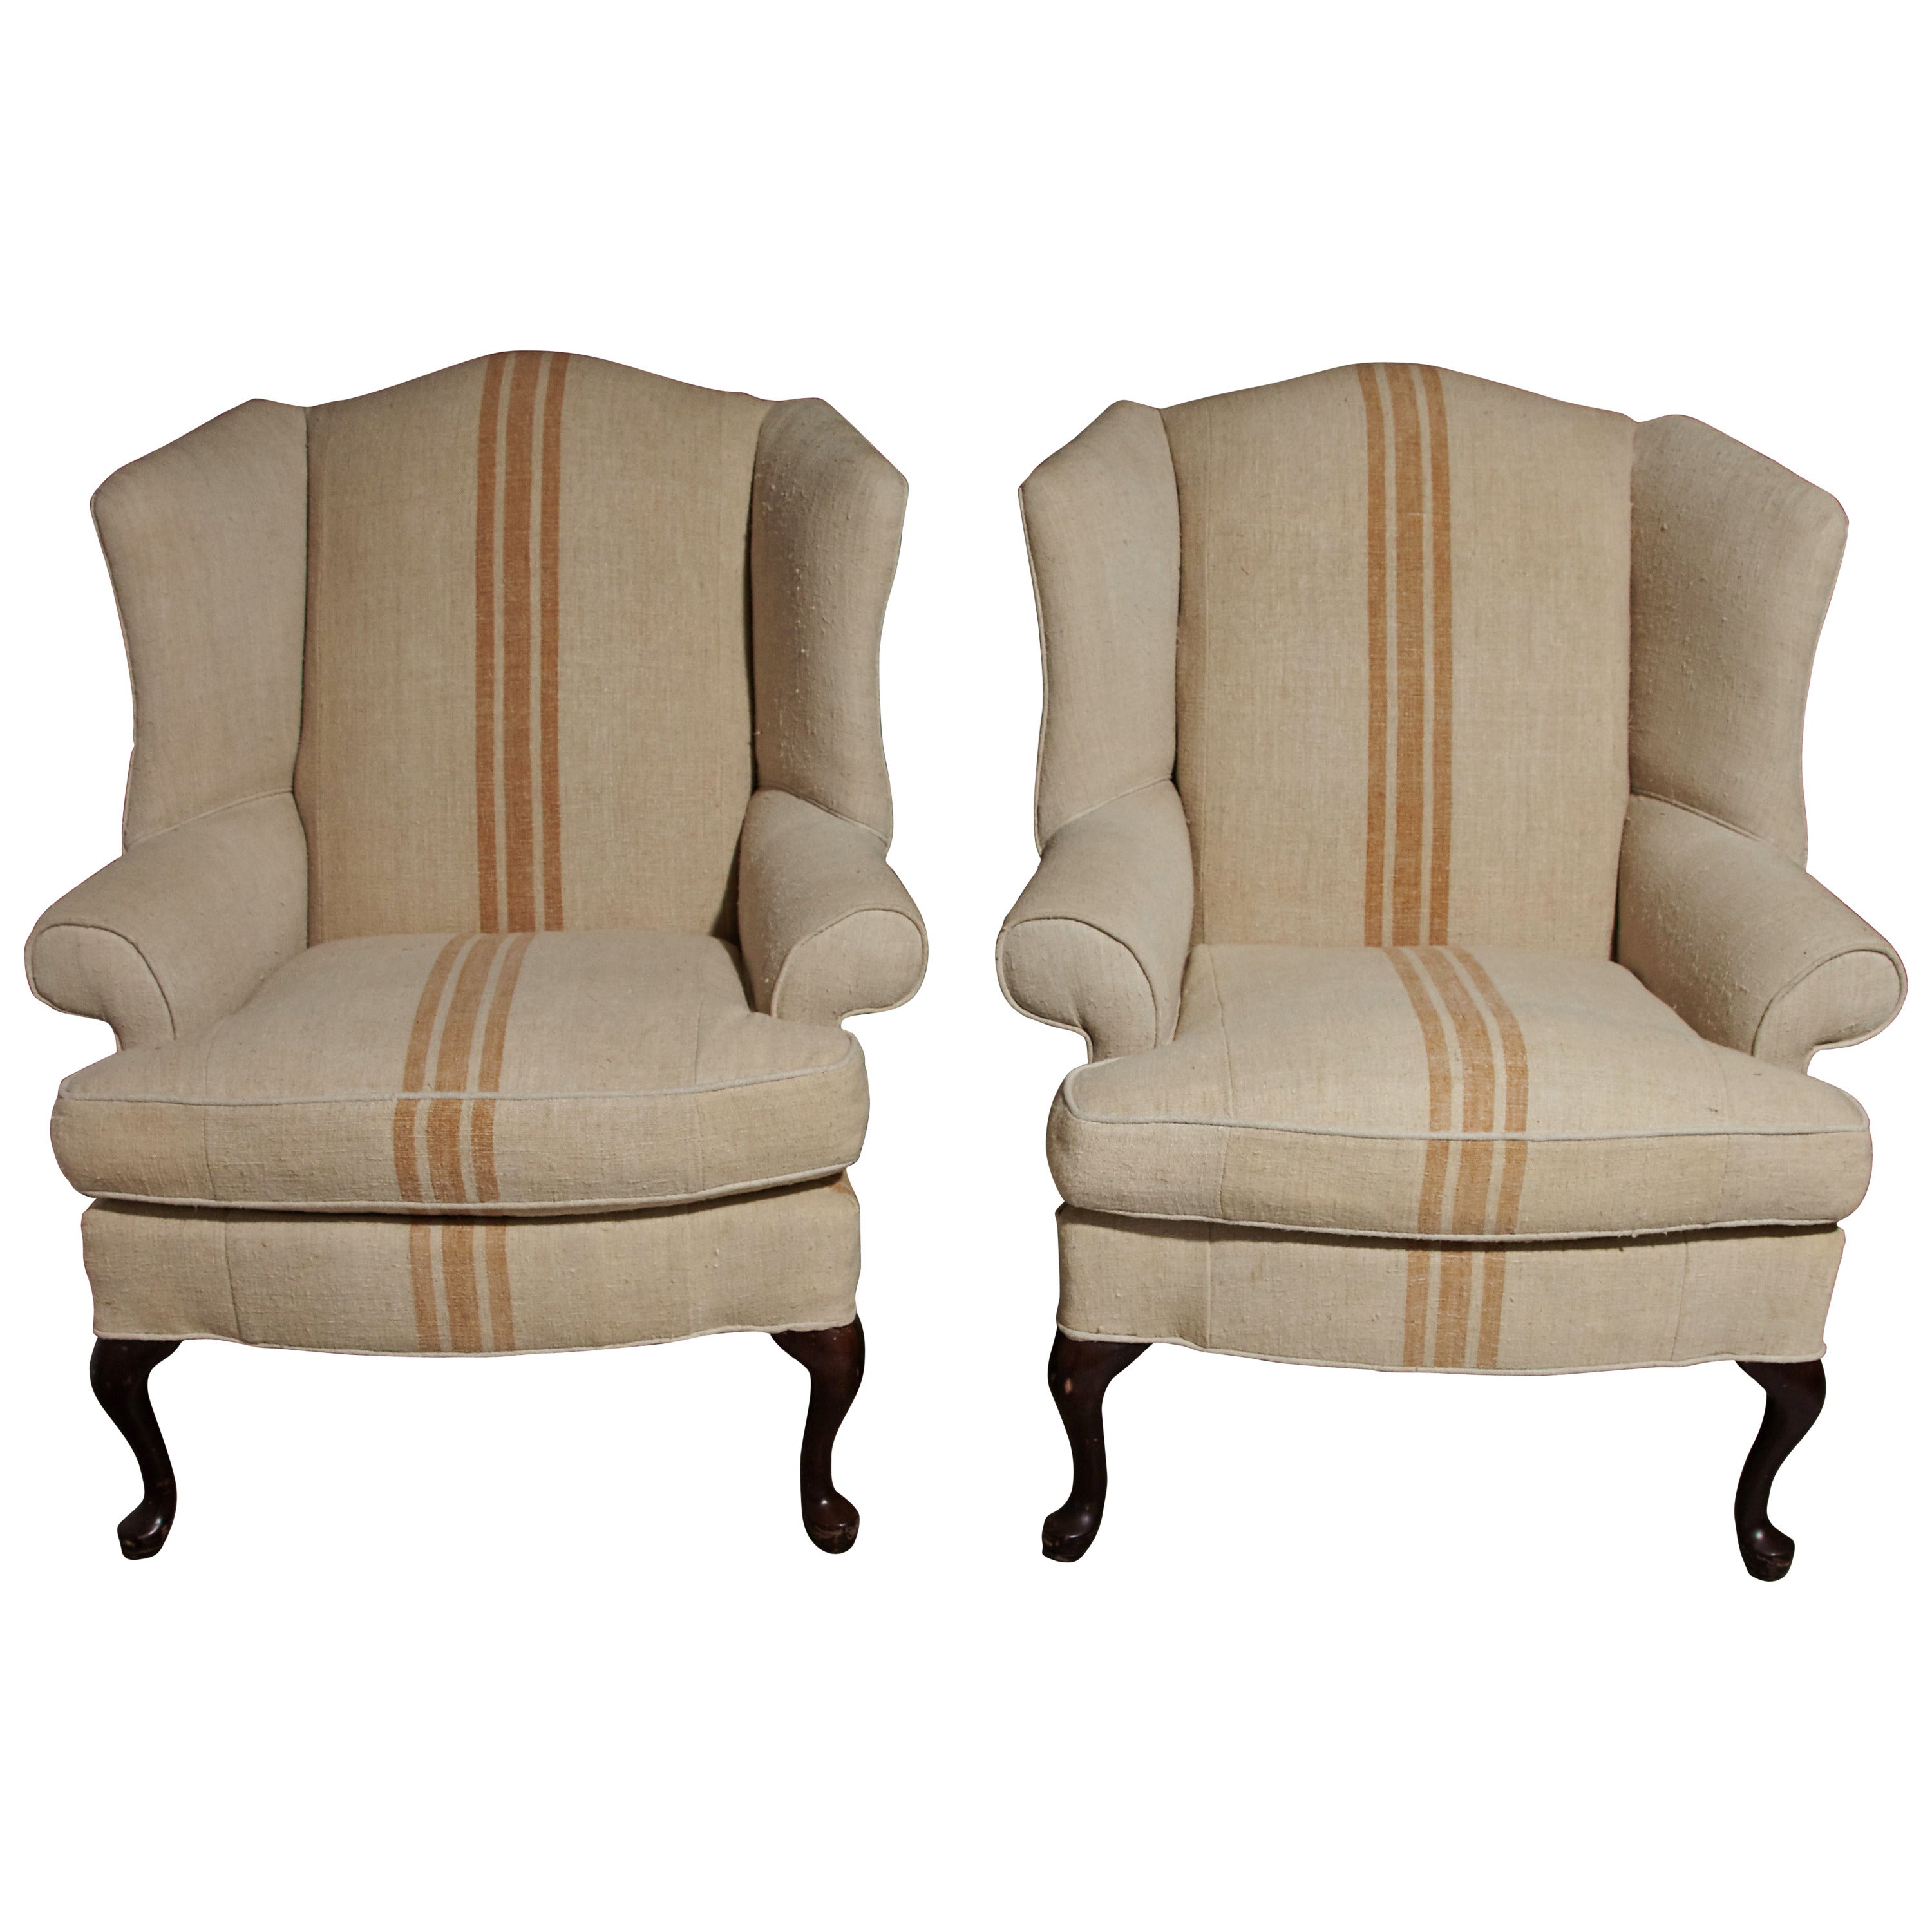 Pair of Queen Anne style Wingback Chairs